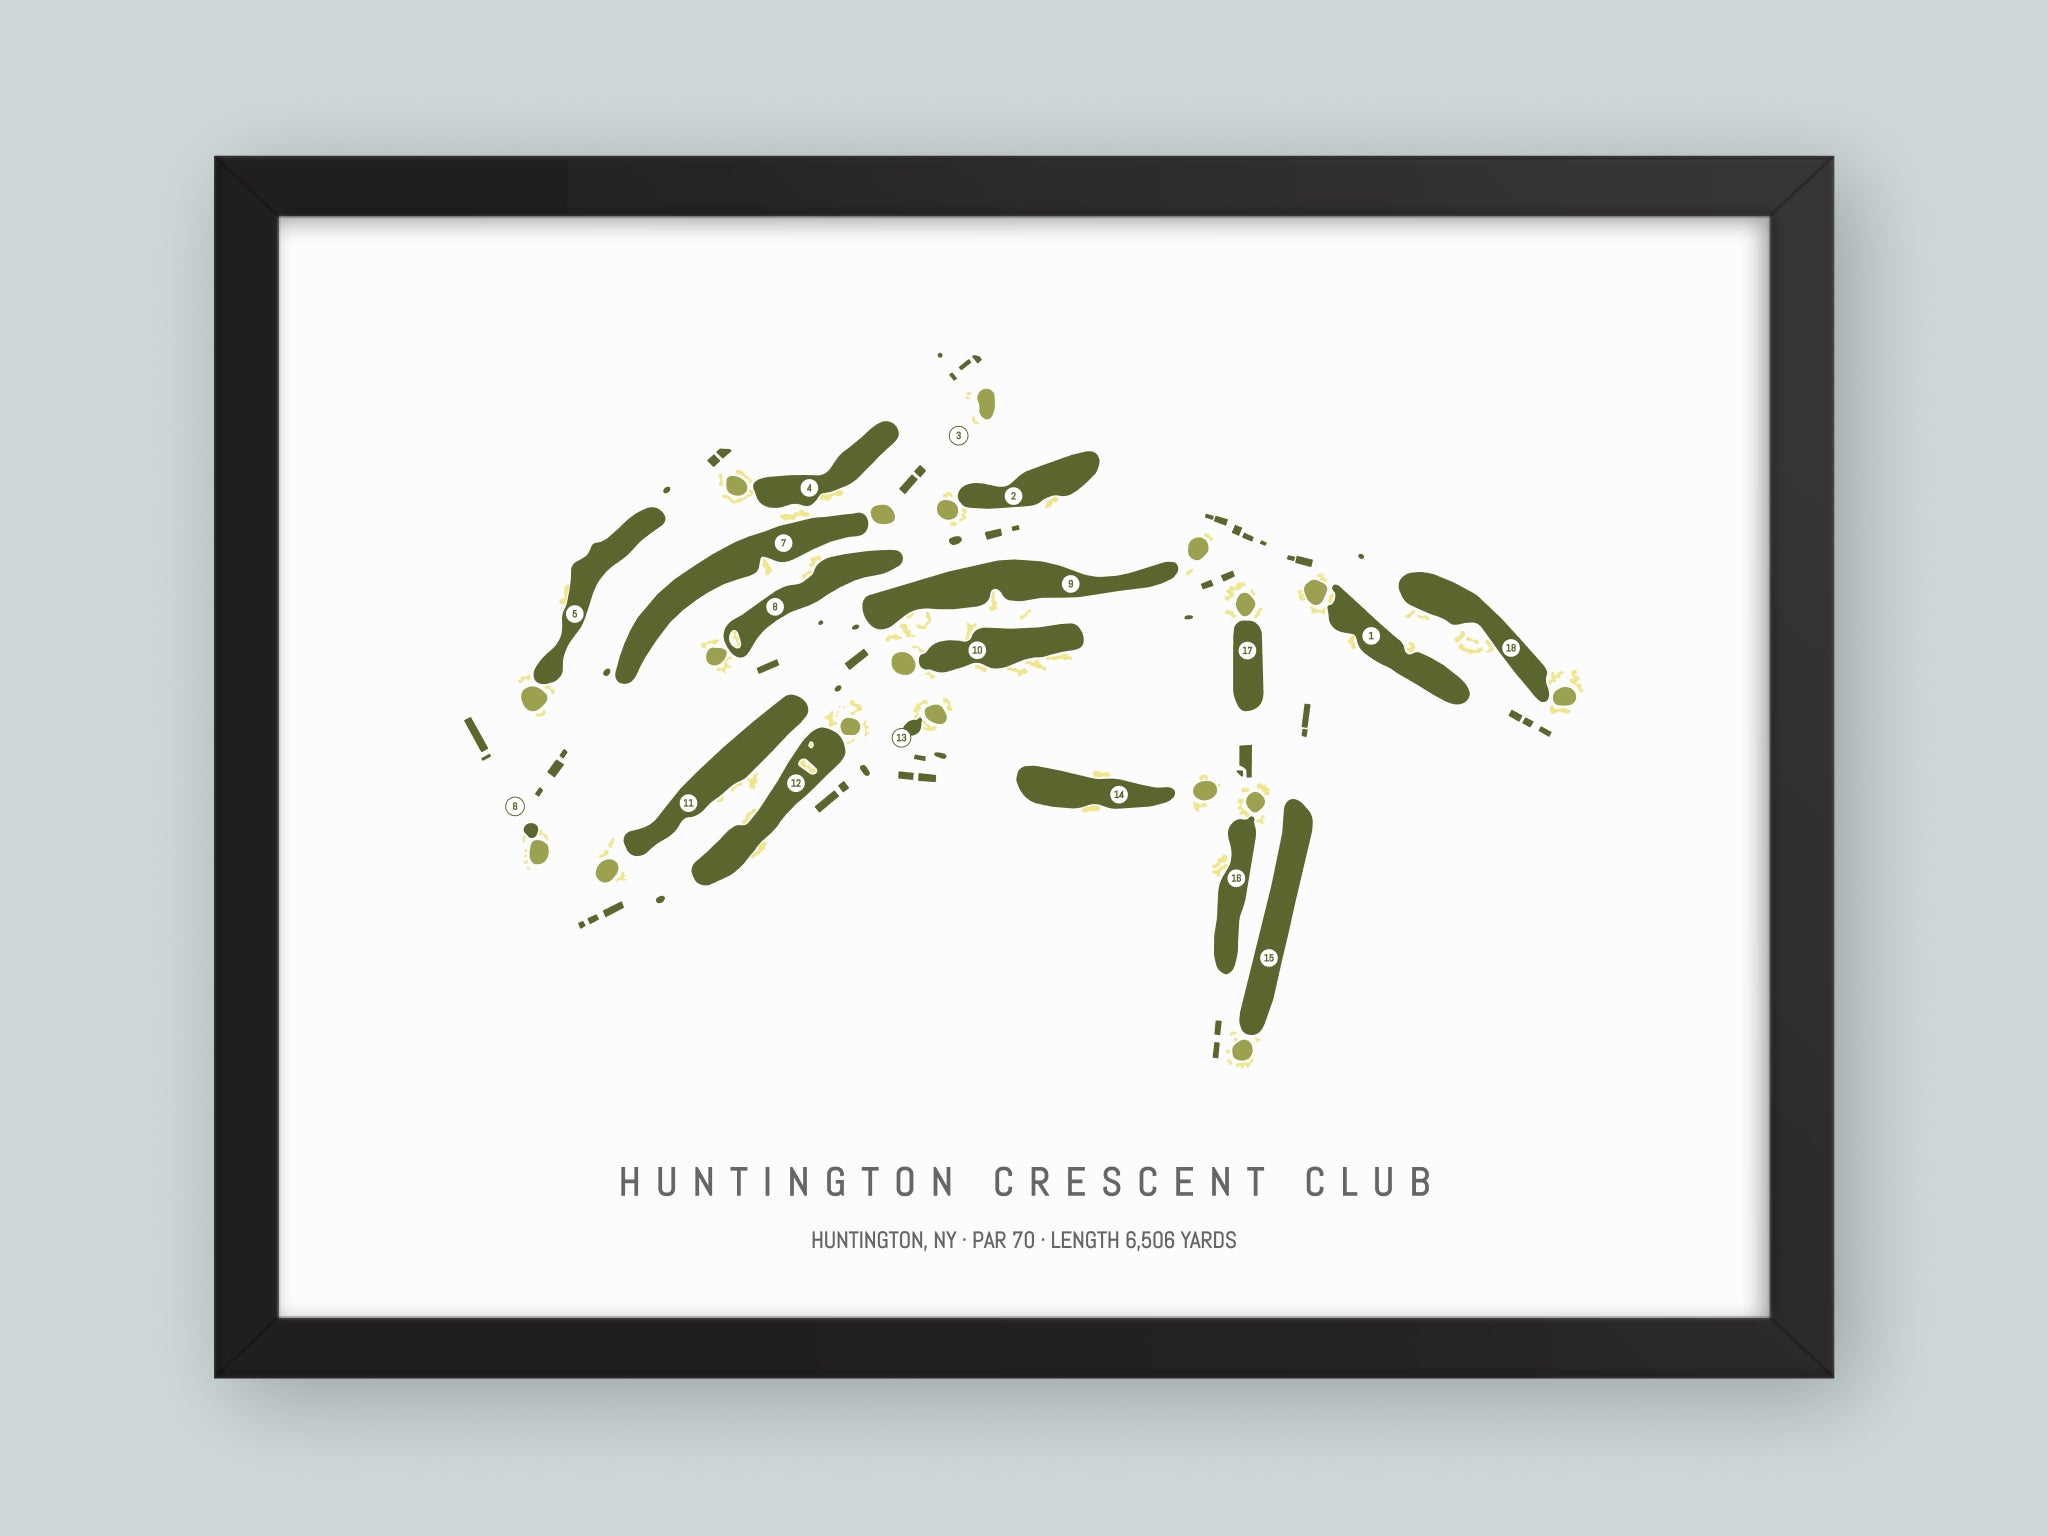 Huntington-Crescent-Club-NY--Black-Frame-24x18-With-Hole-Numbers